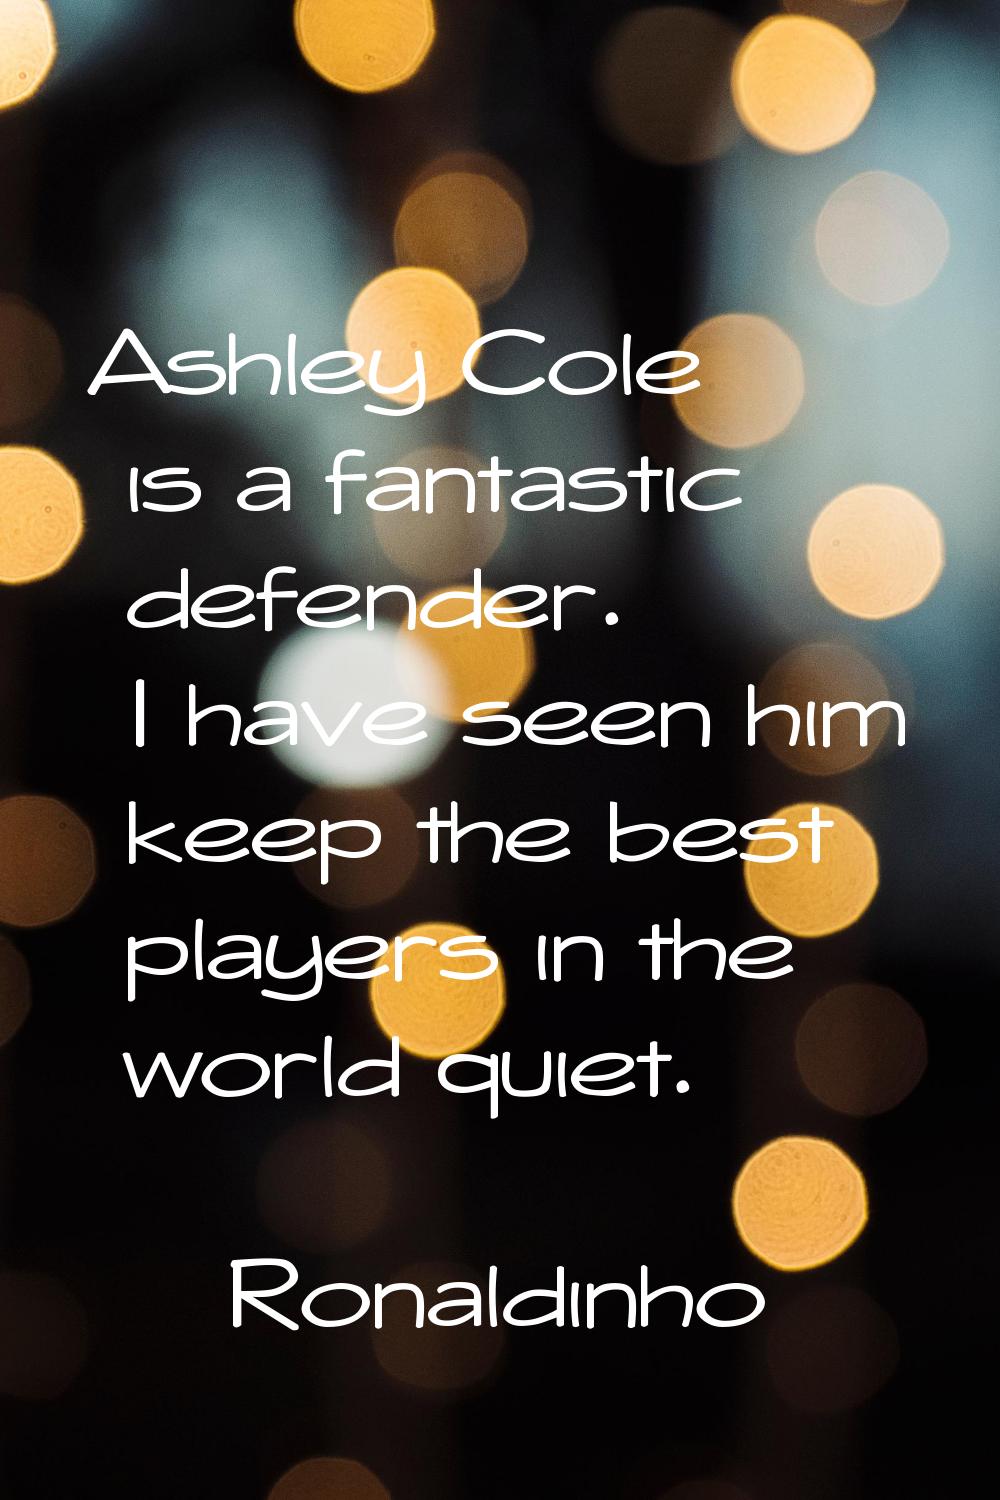 Ashley Cole is a fantastic defender. I have seen him keep the best players in the world quiet.